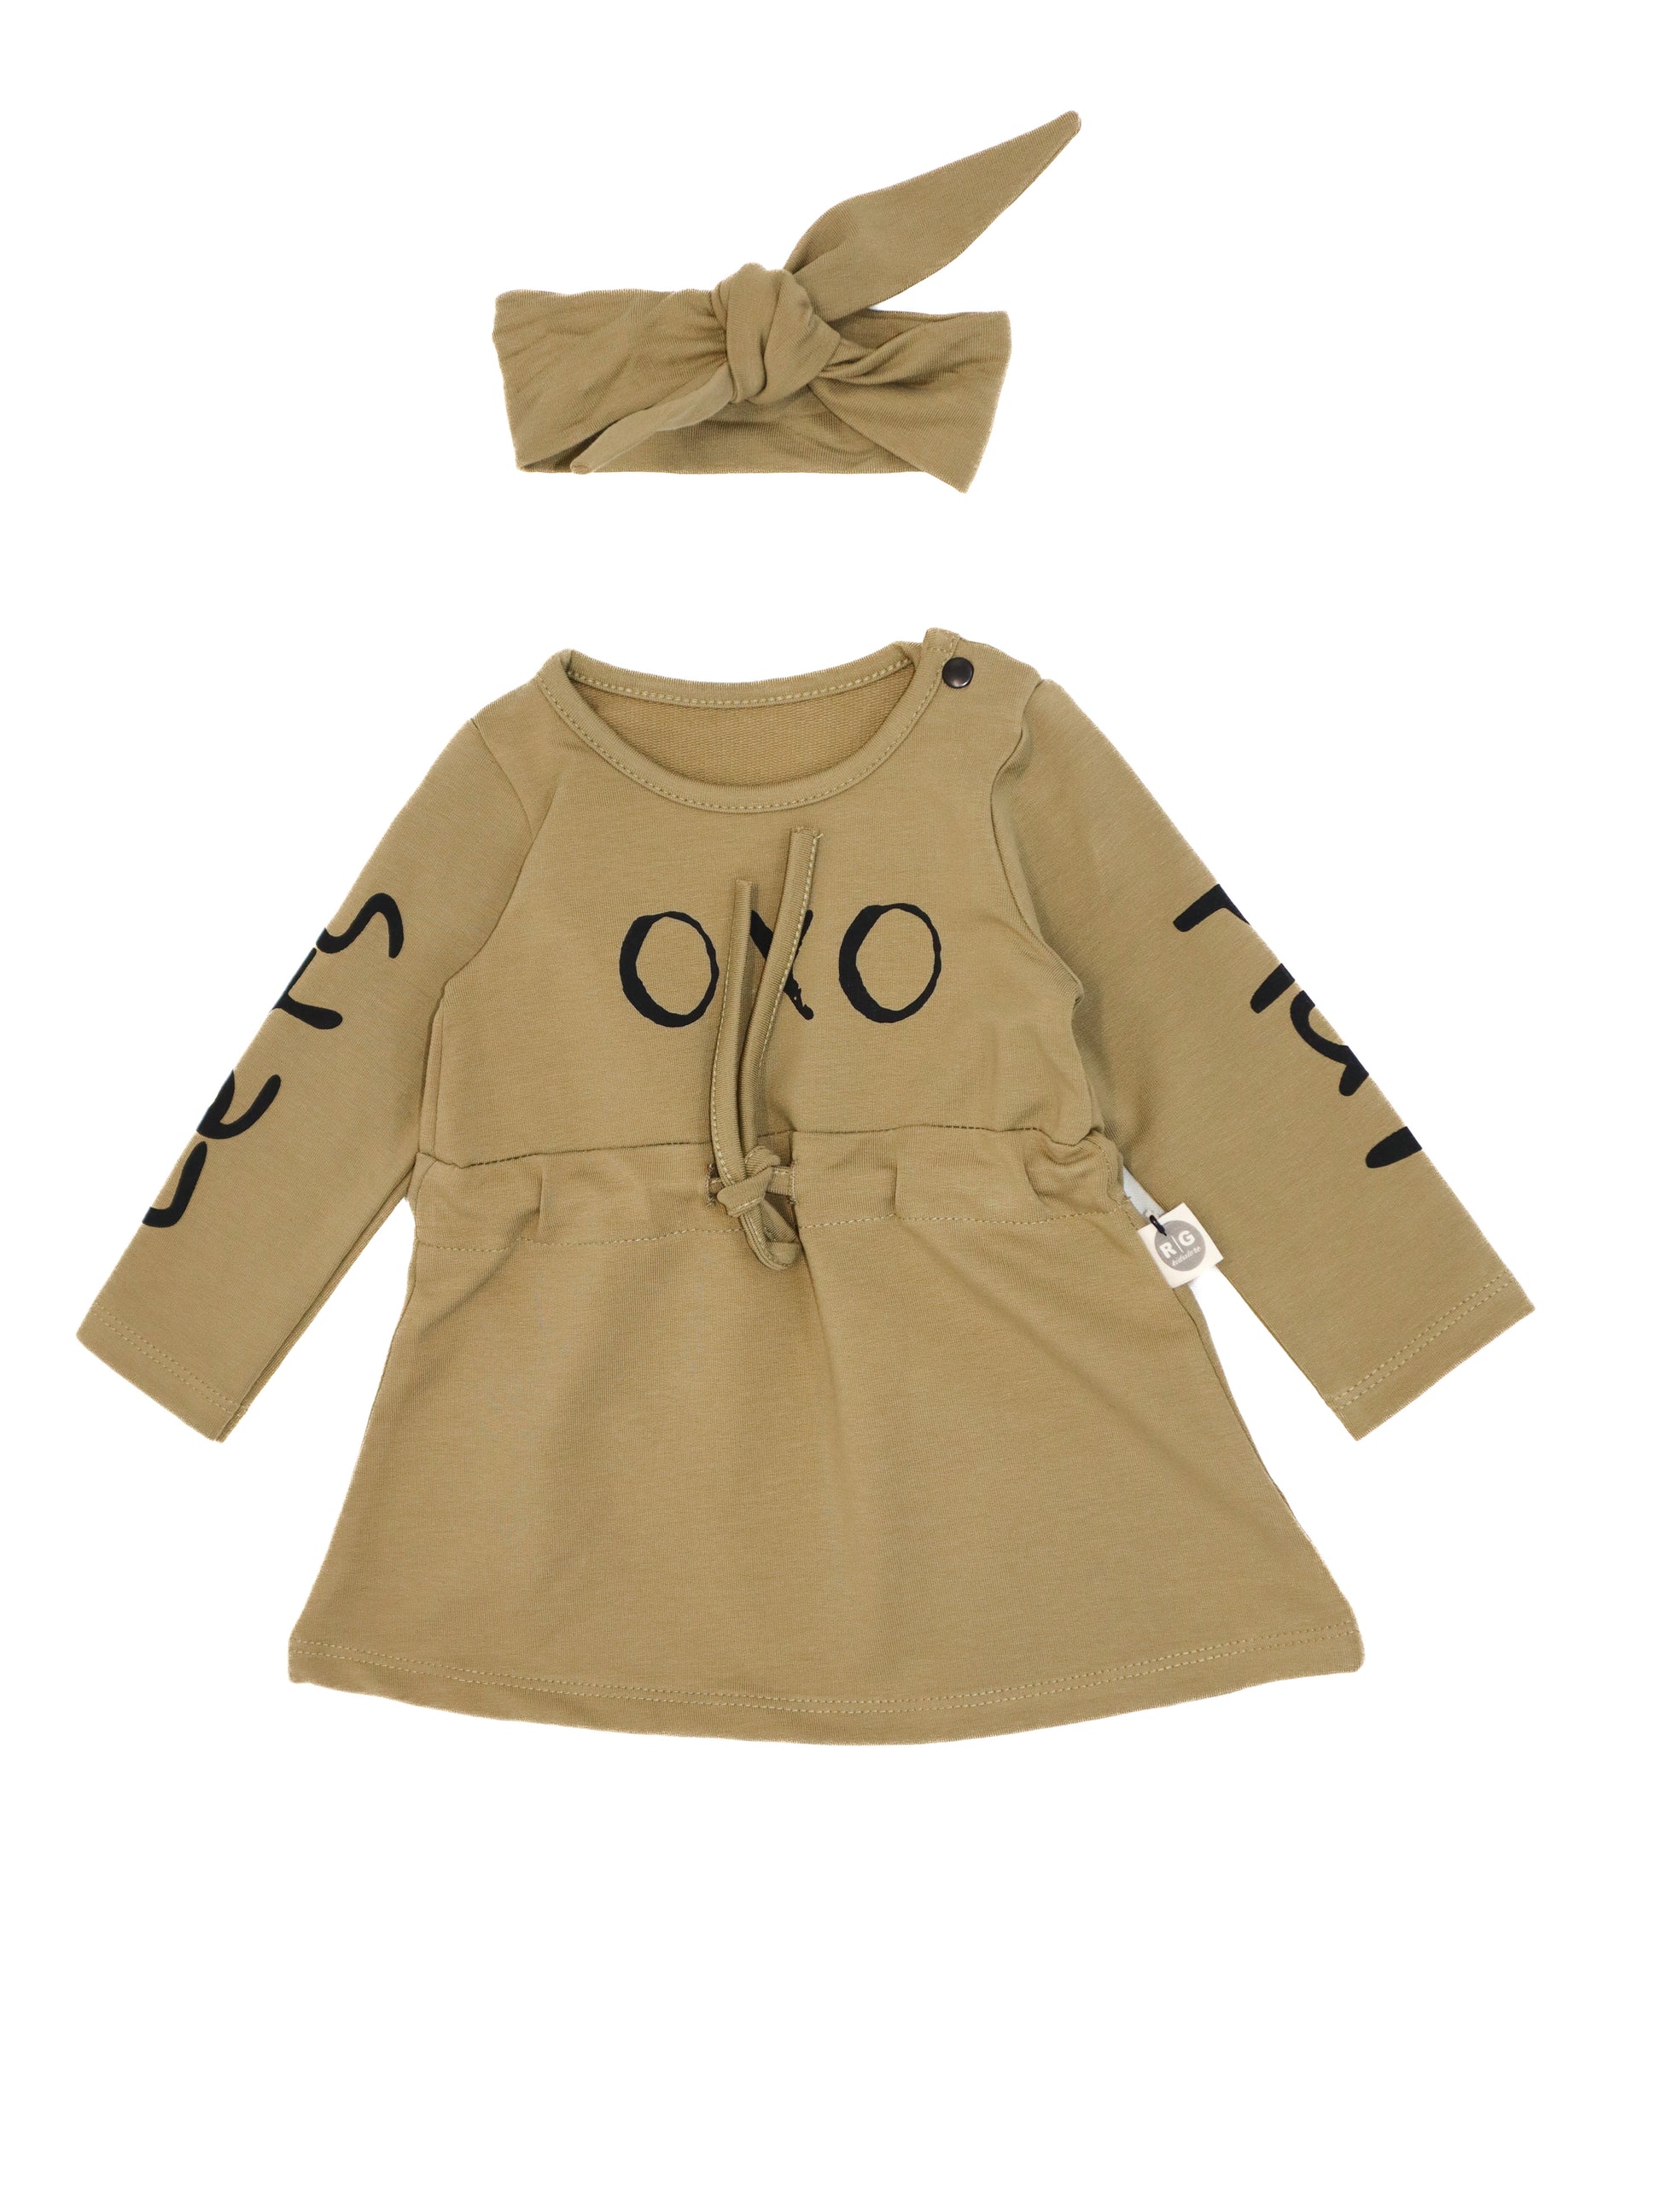 Baby 100% Cotton OXO Printed Dress and Ribbon Set